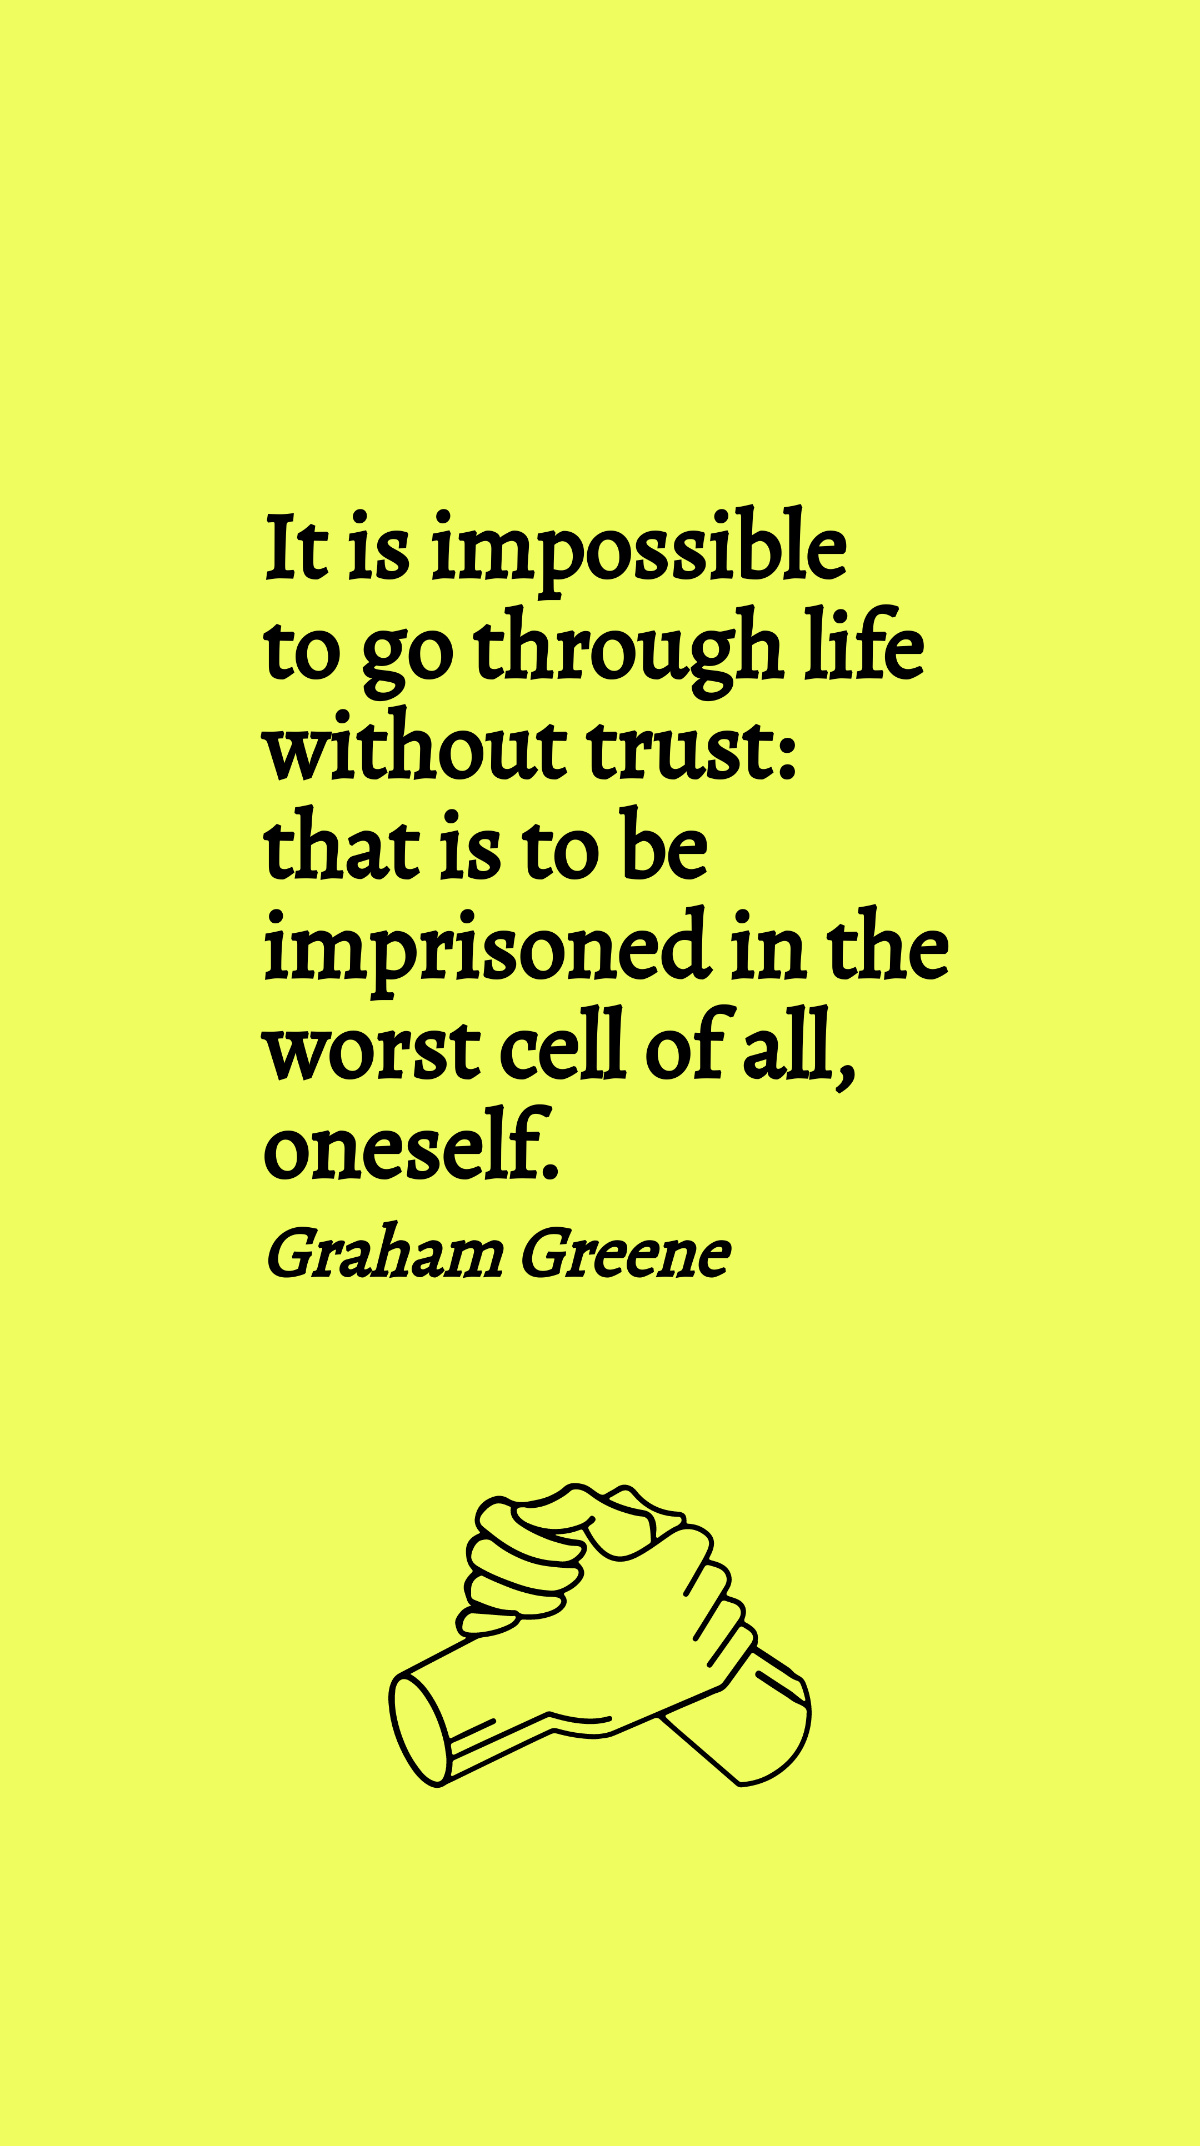 Graham Greene - It is impossible to go through life without trust: that is to be imprisoned in the worst cell of all, oneself.